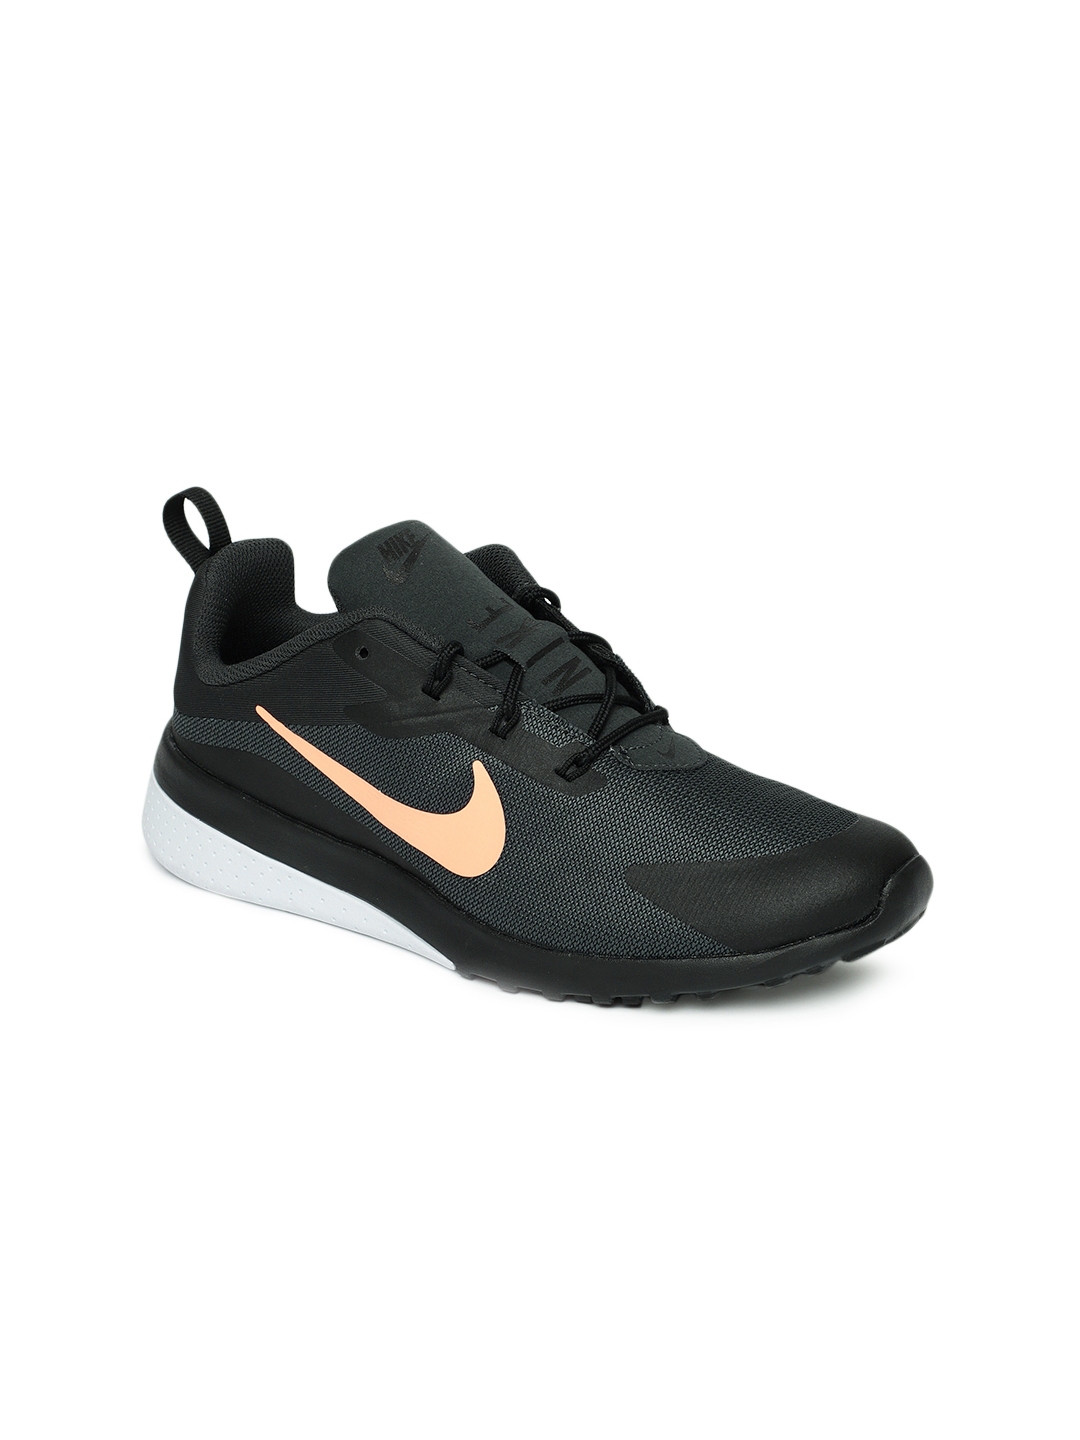 nike ck racer 2 shoes